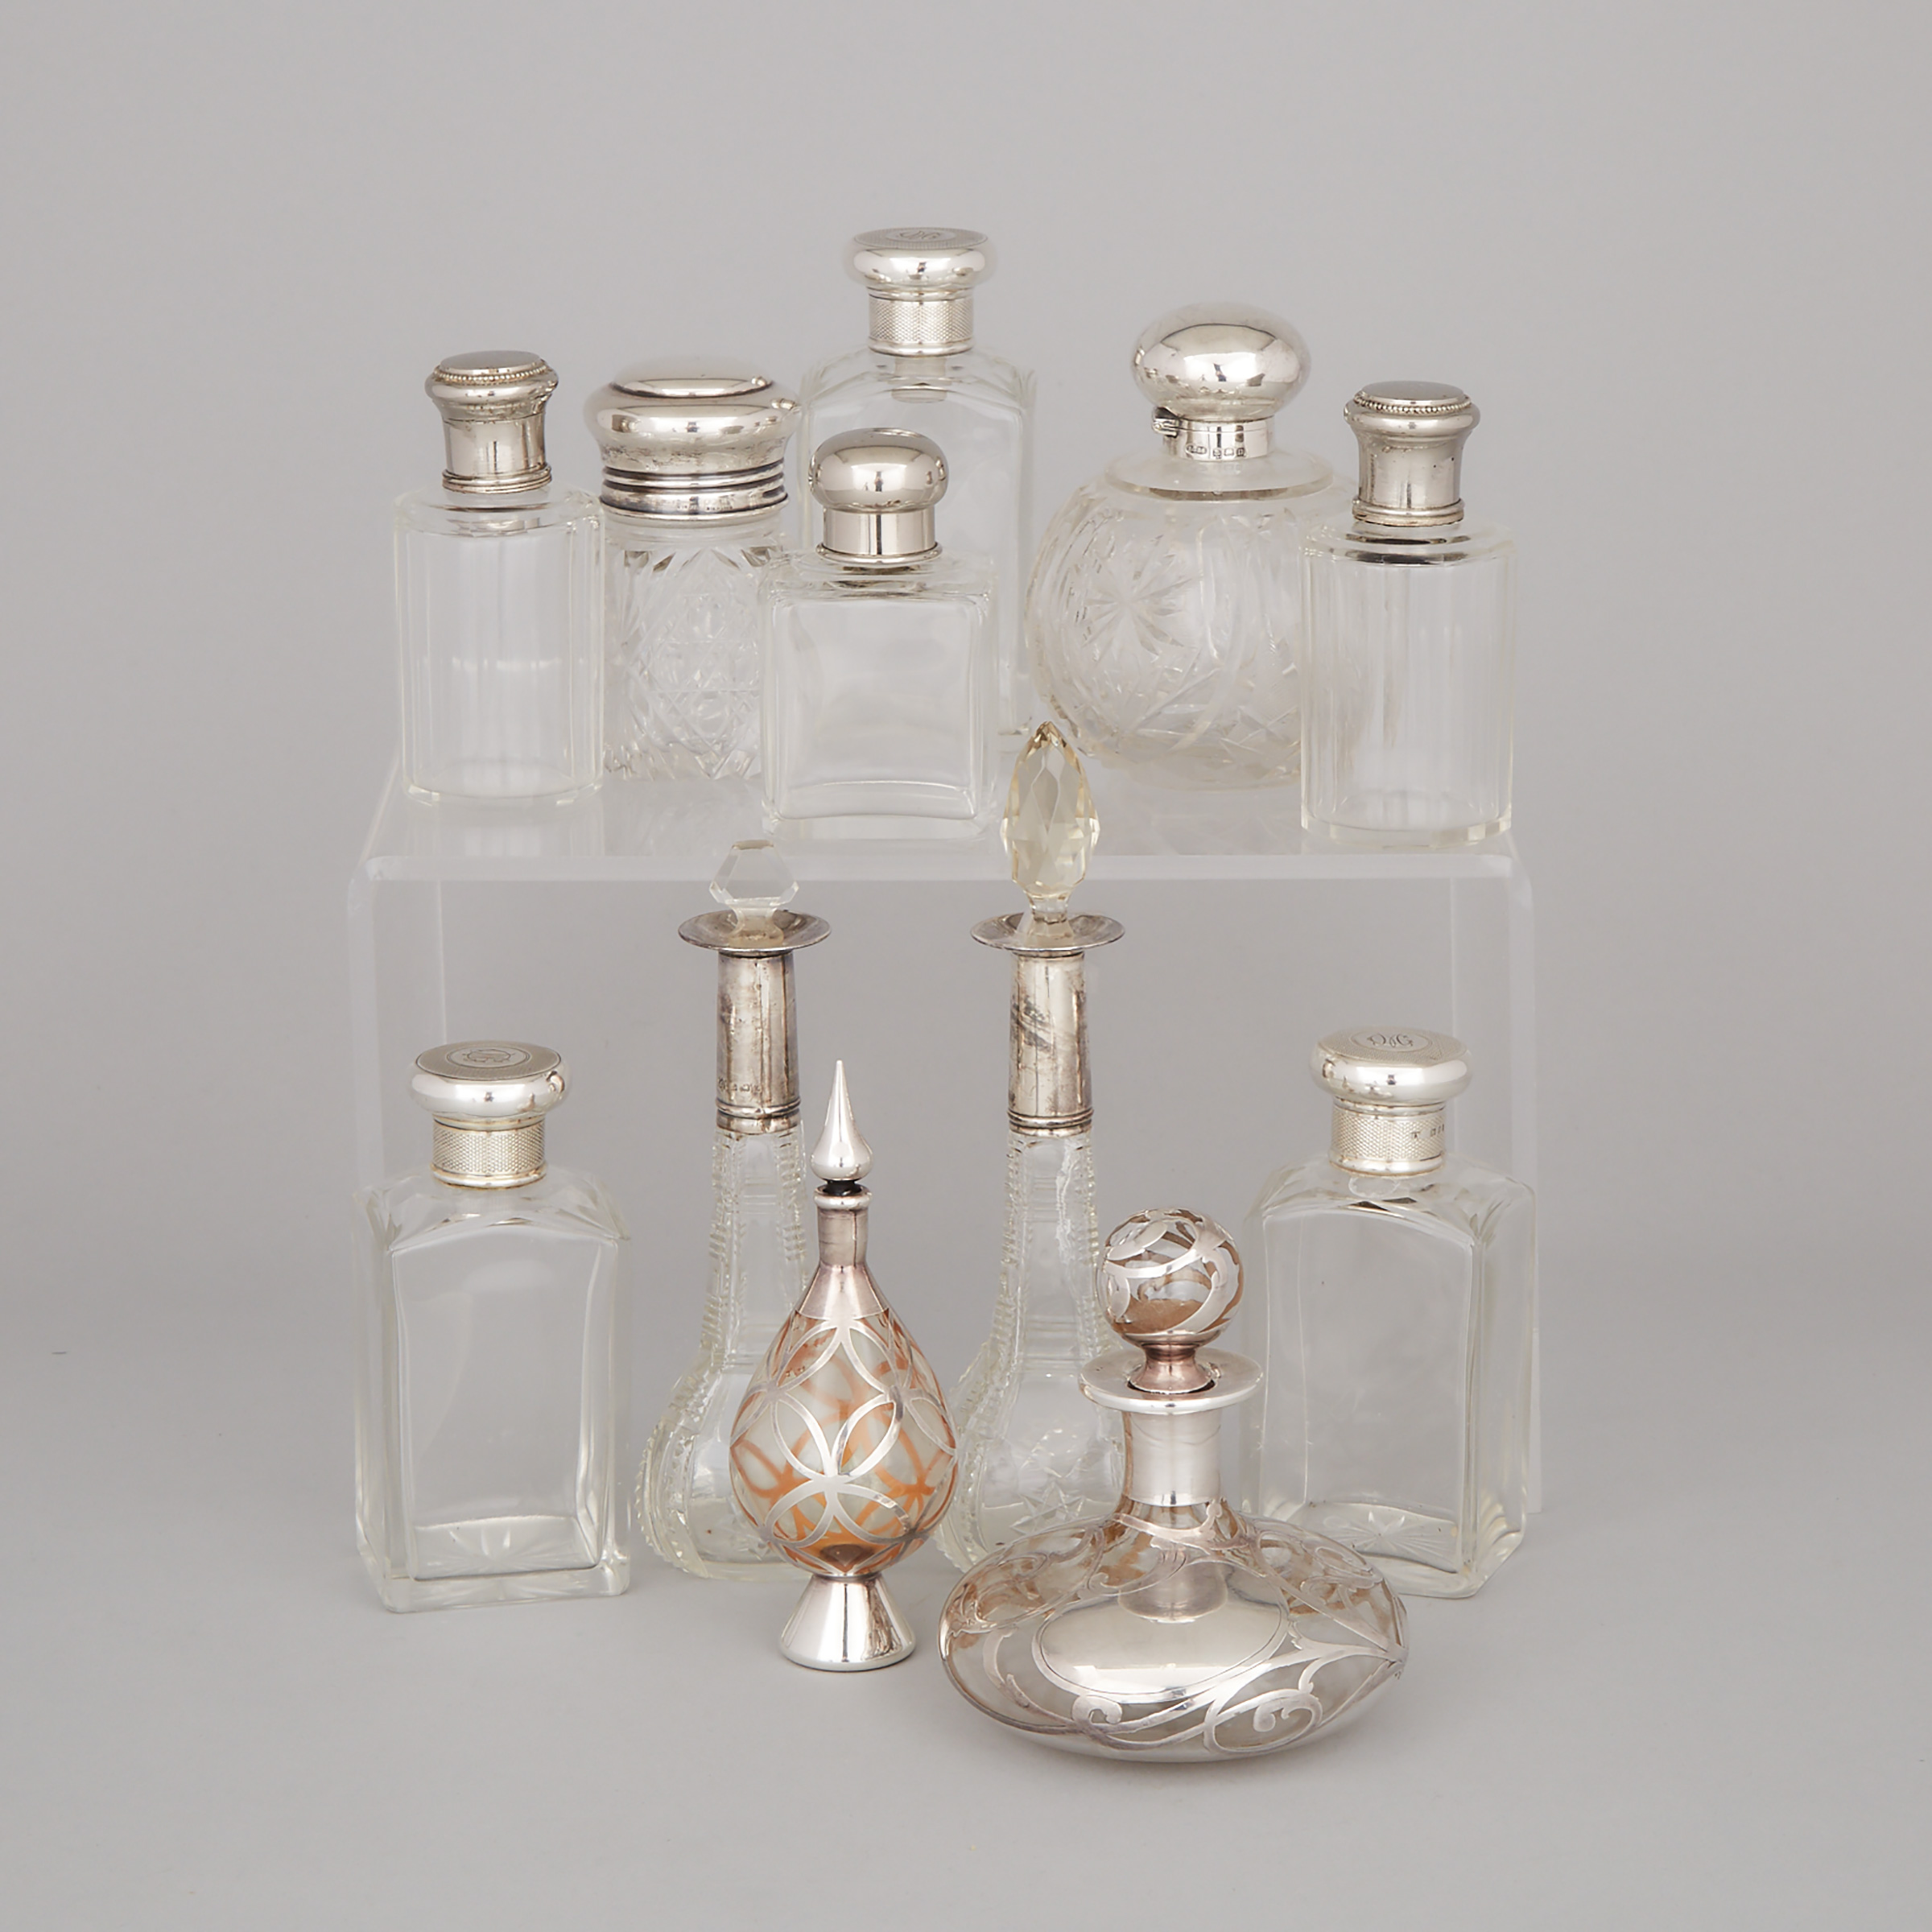 Twelve Mainly Silver Mounted Glass Perfume and Toilet Water Bottles and Jars, 20th century